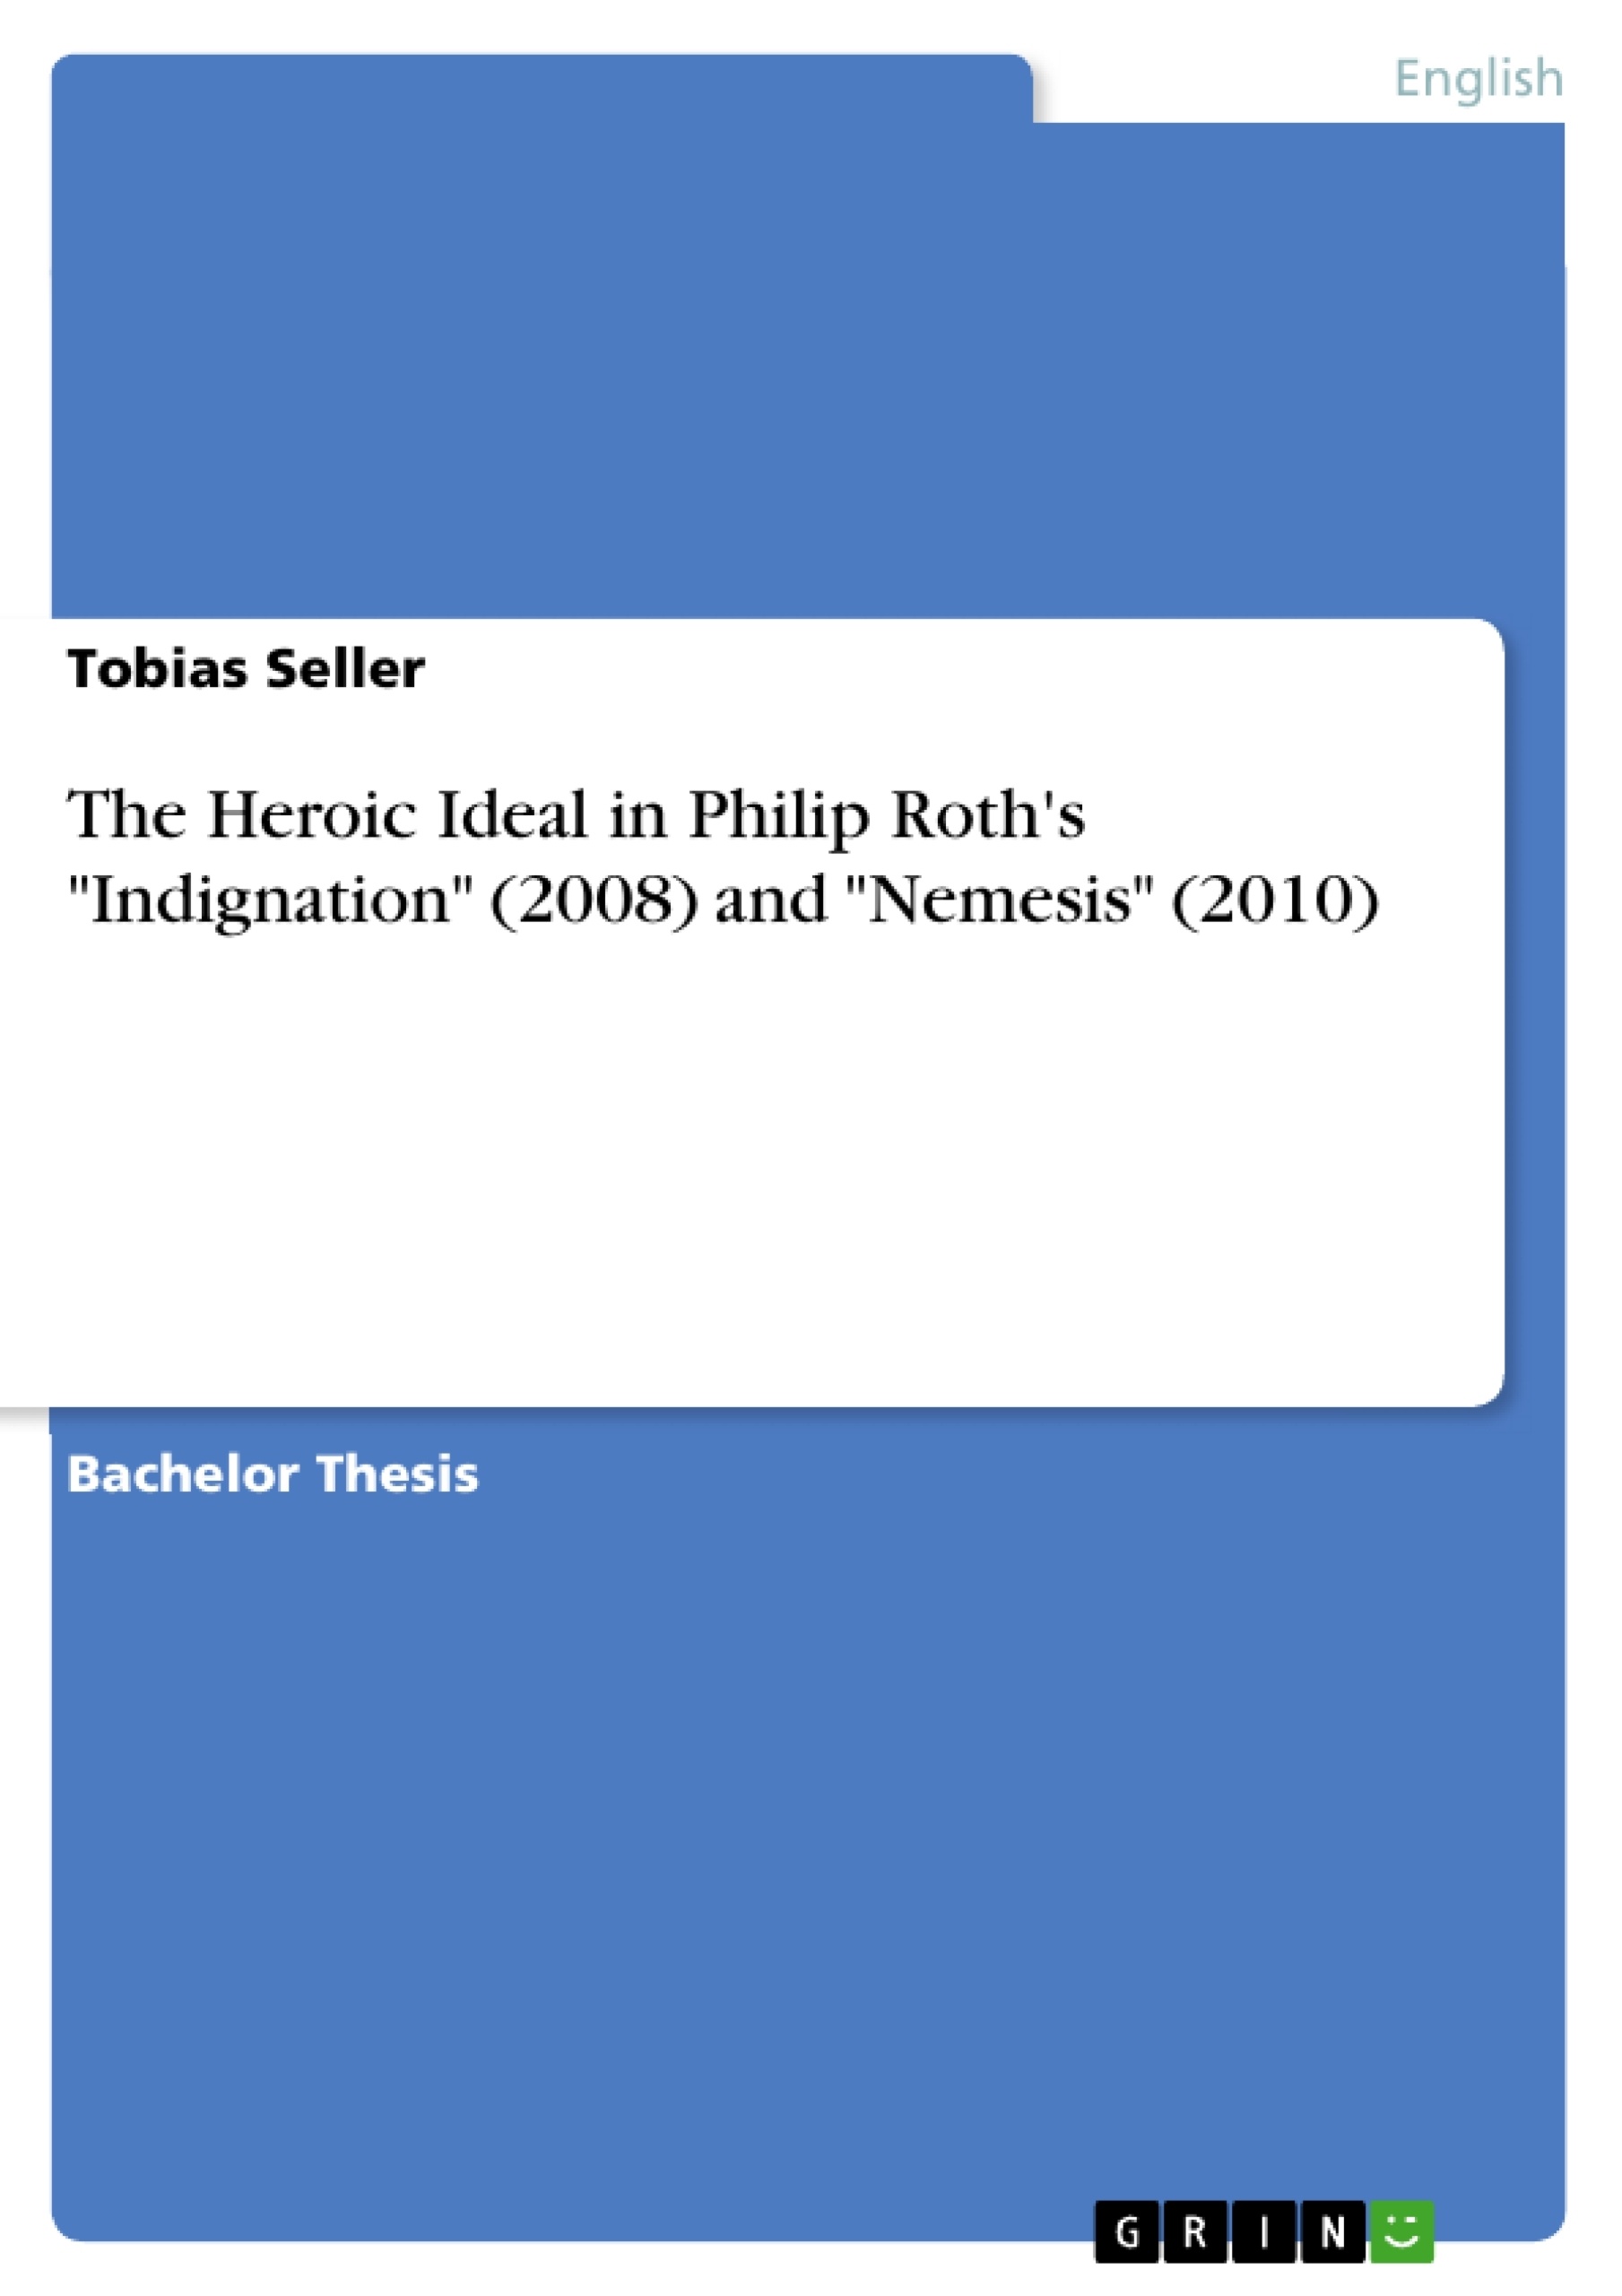 Título: The Heroic Ideal in Philip Roth's "Indignation" (2008) and "Nemesis" (2010)